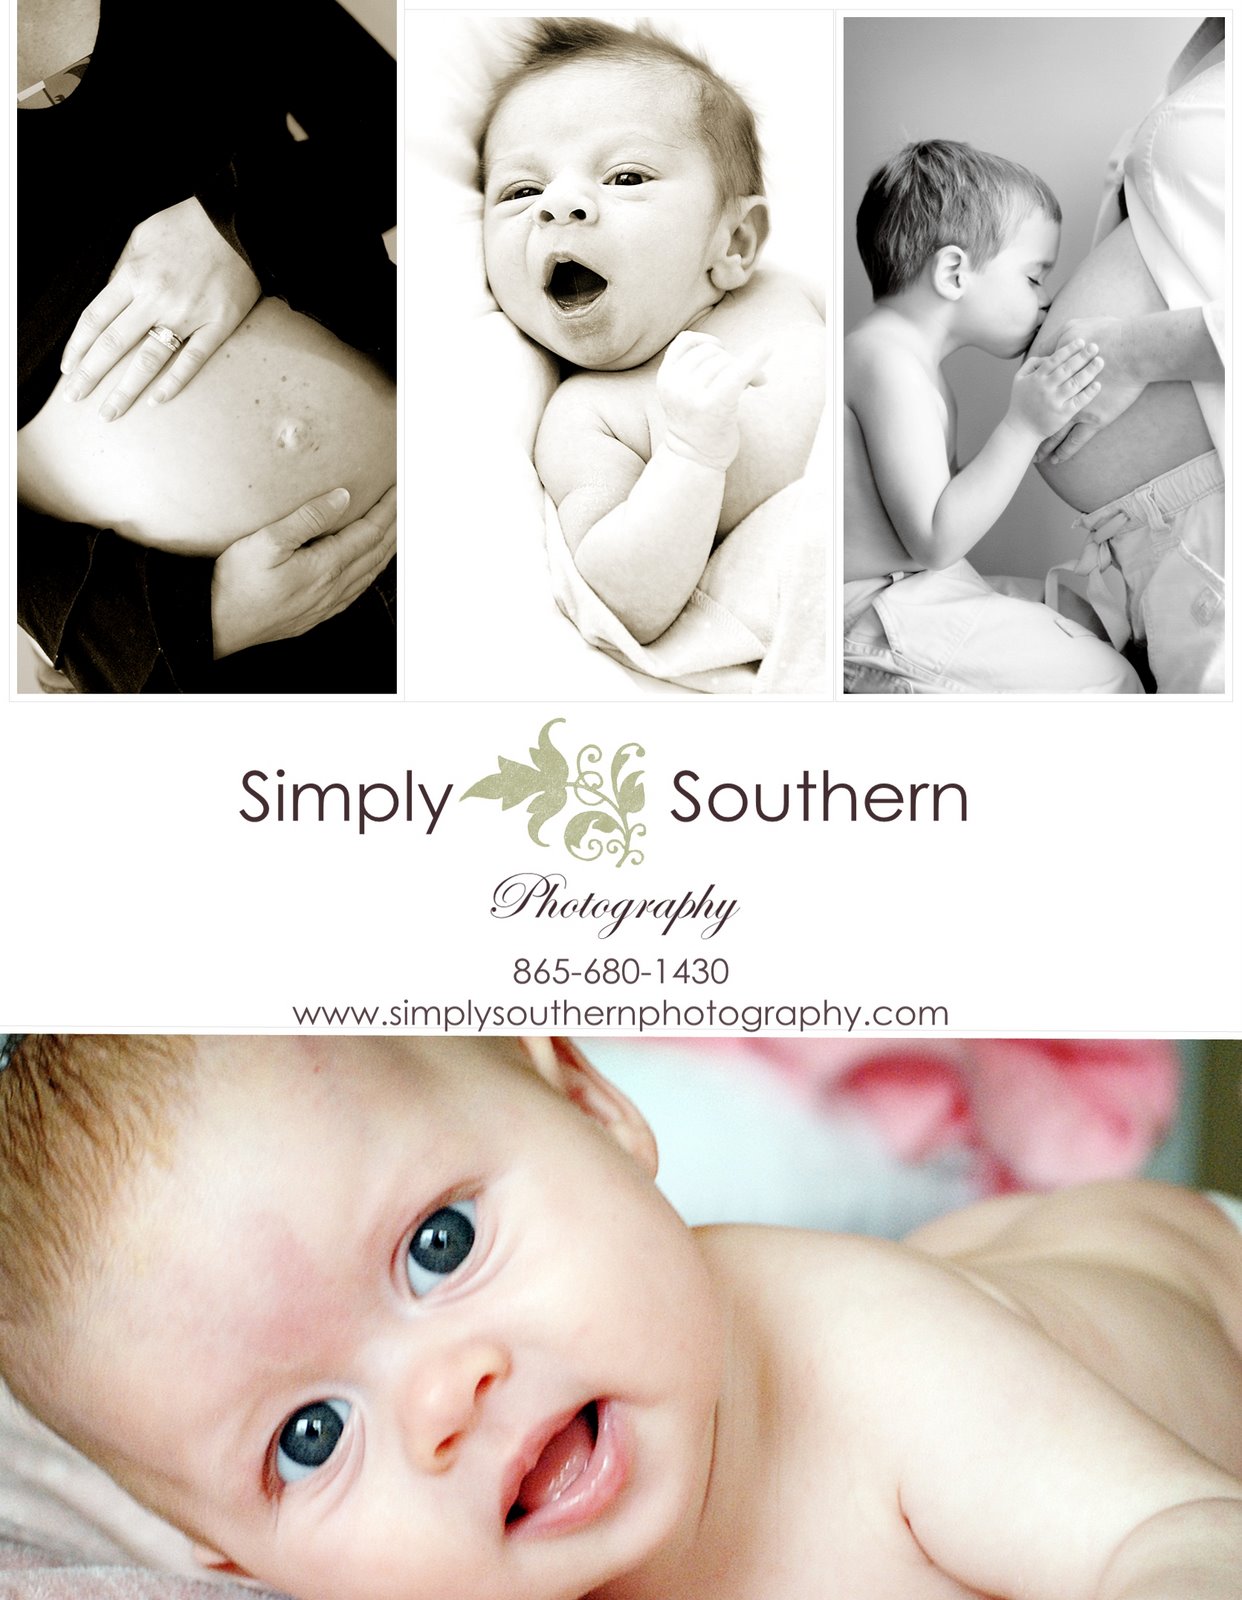 Simply Southern Photography